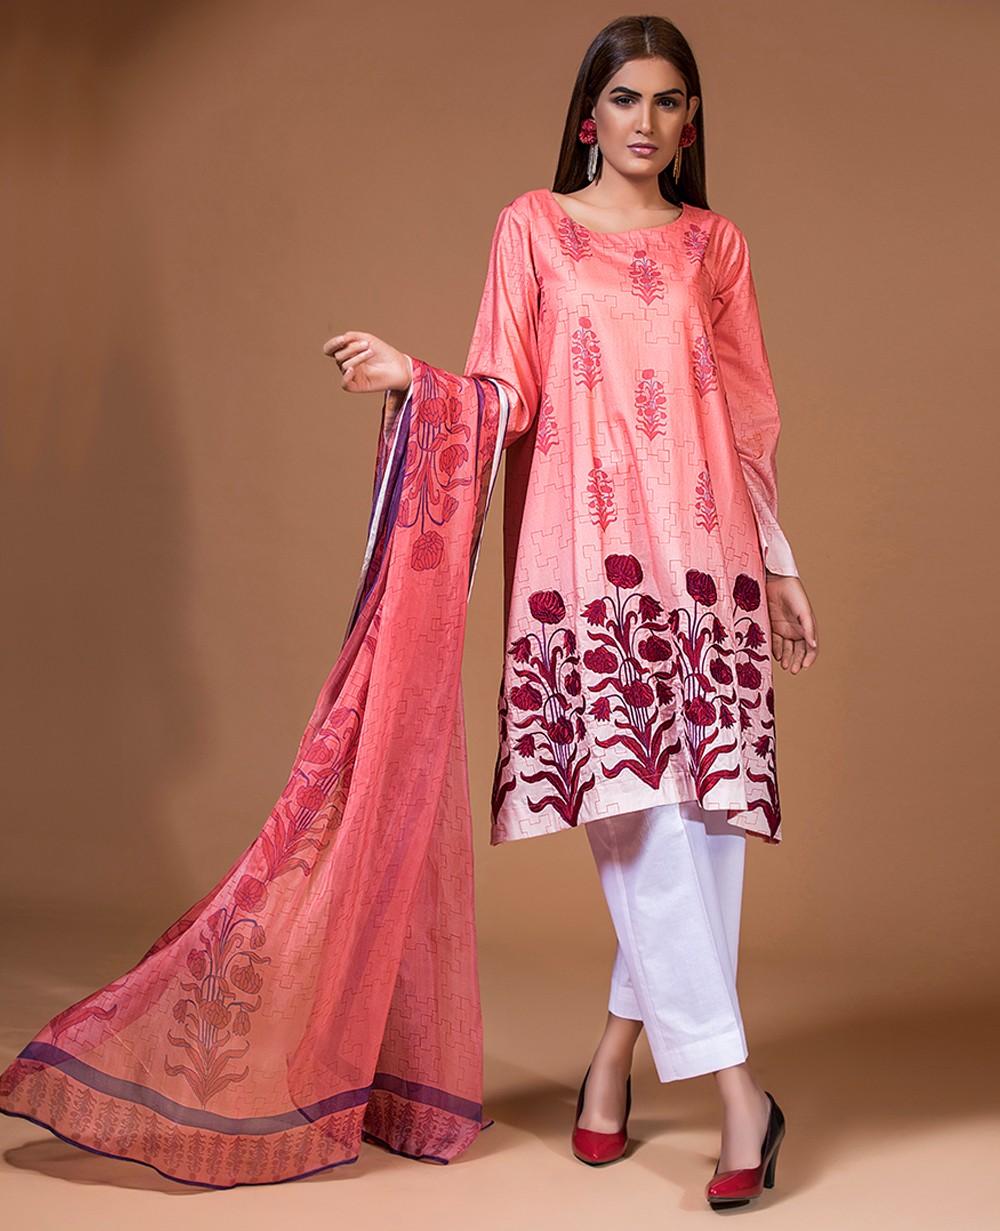 Ghaznavid Winter Collection by Khat e Poesh 13